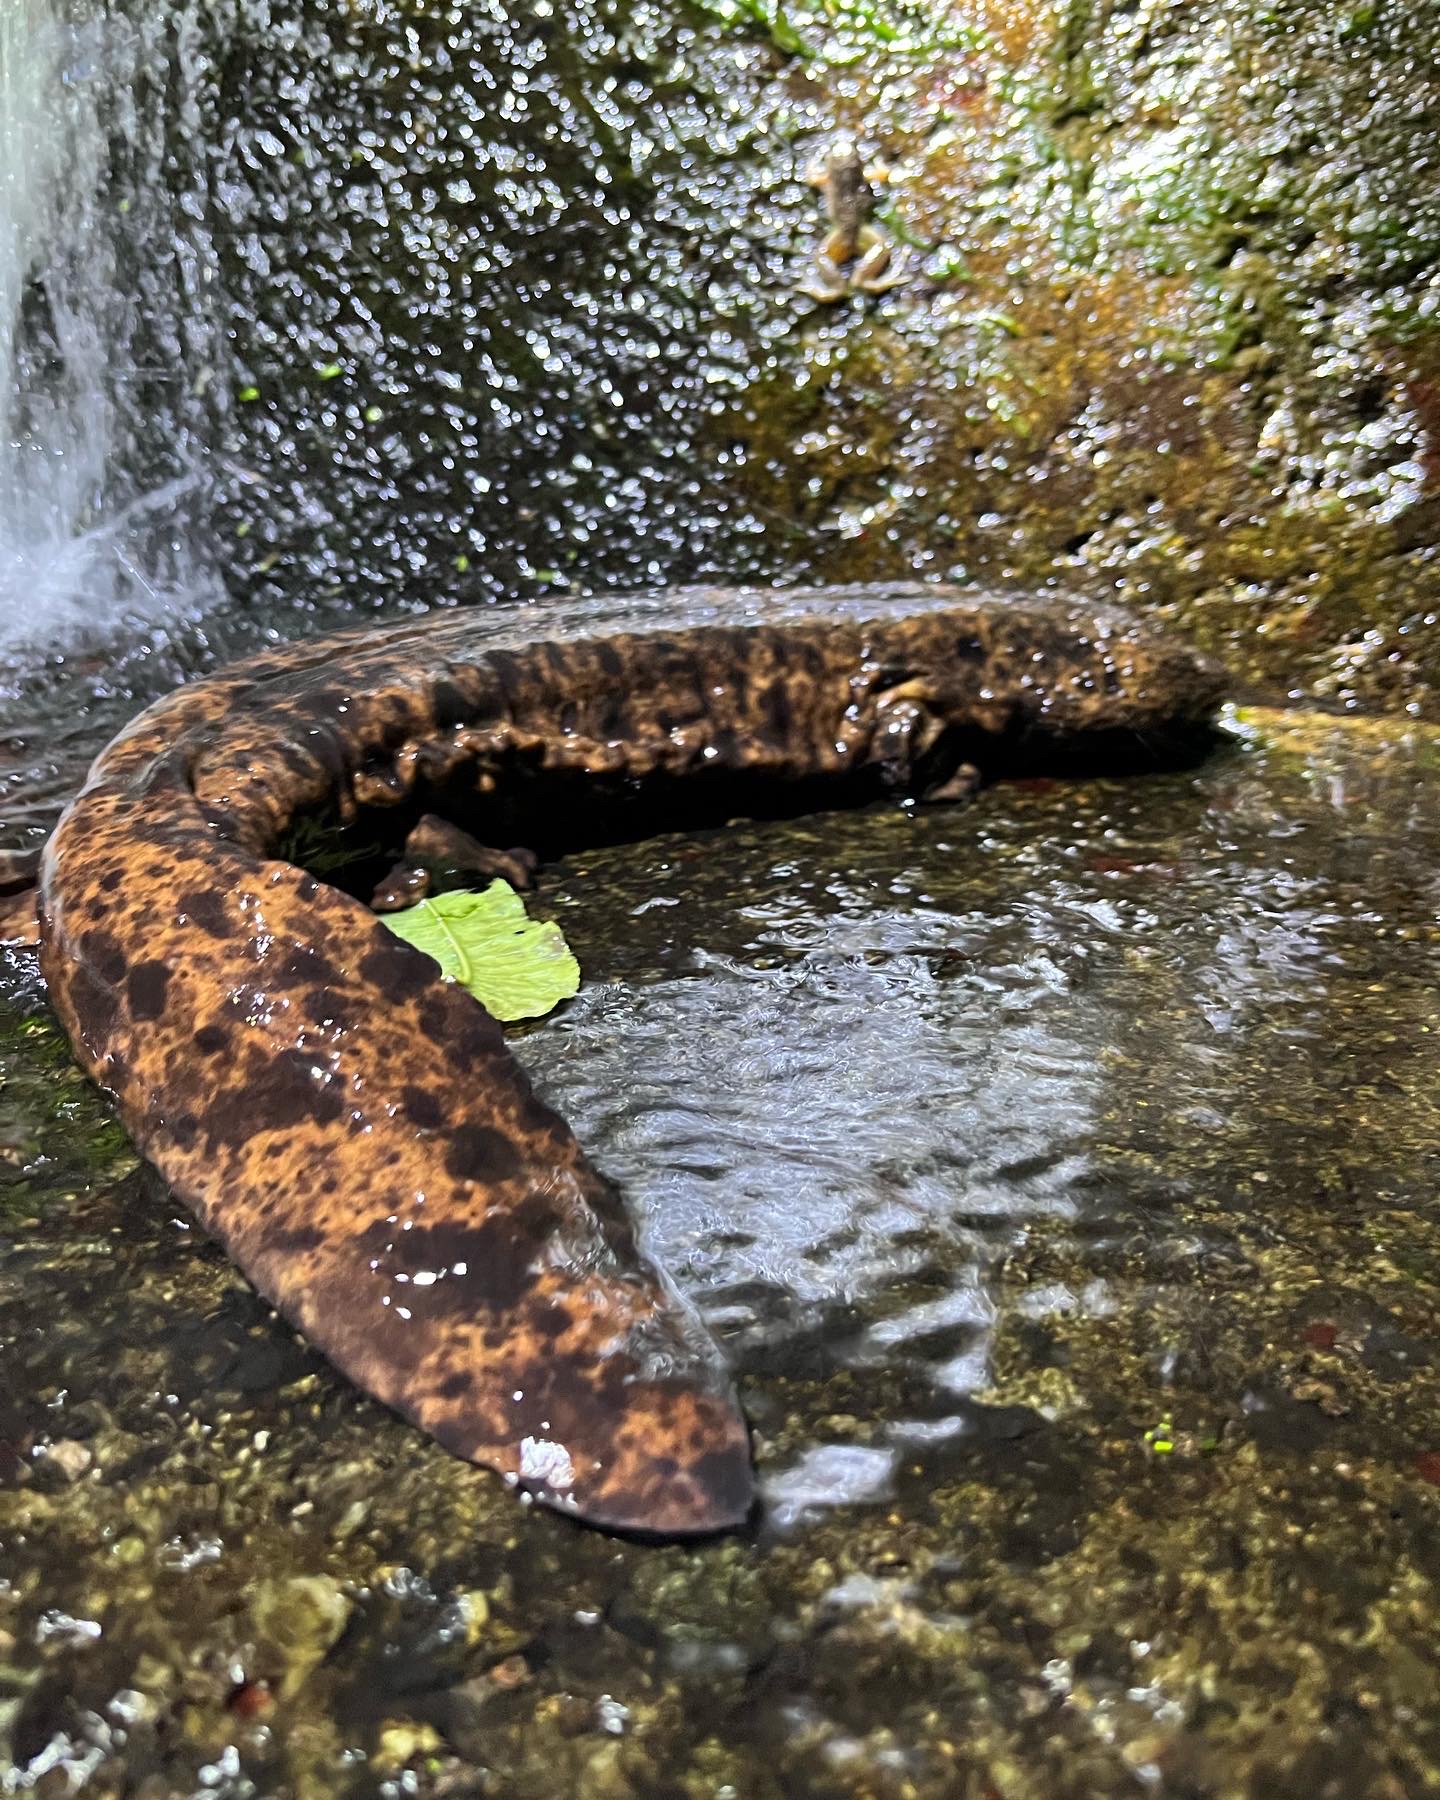 A New Approach for Japanese Giant Salamander Conservation